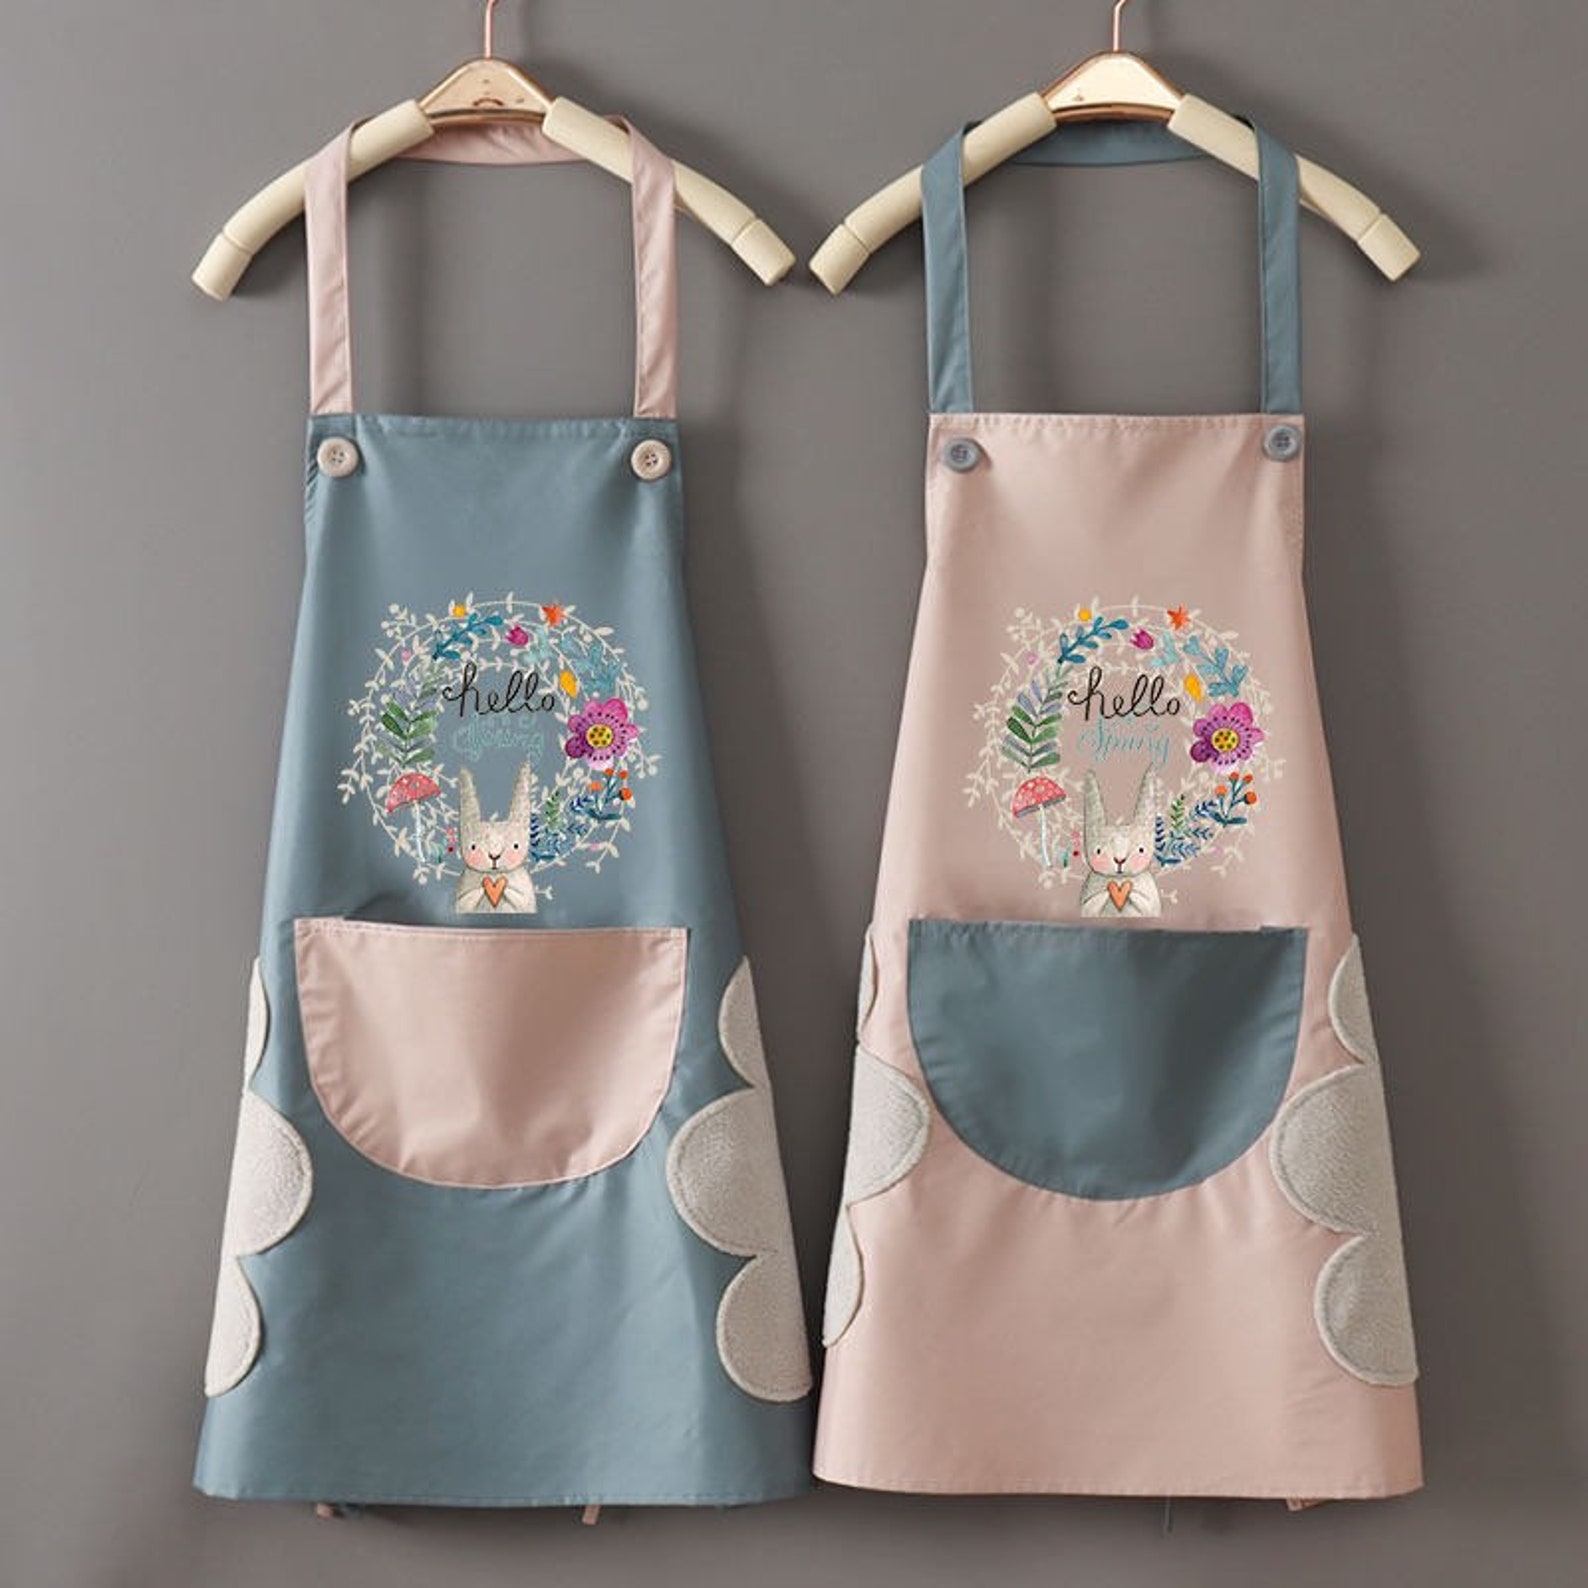 Cute Apron Washed Apron For Cooking Gardening Short Apron Etsy 